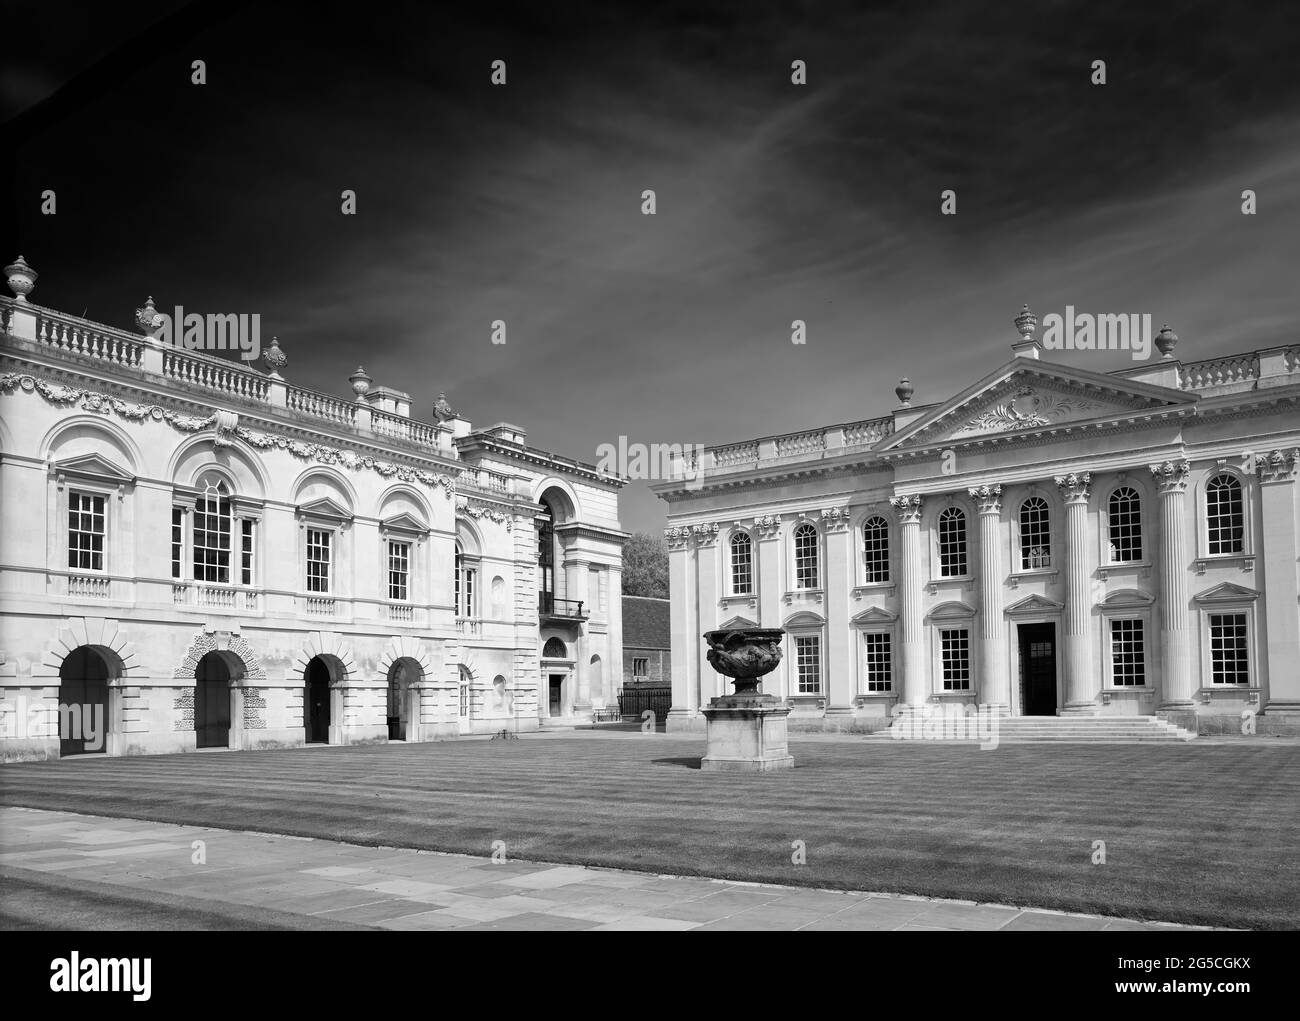 Panoramic view of Senate house and the Old Schools with their lawn at the university of Cambridge, England. Stock Photo